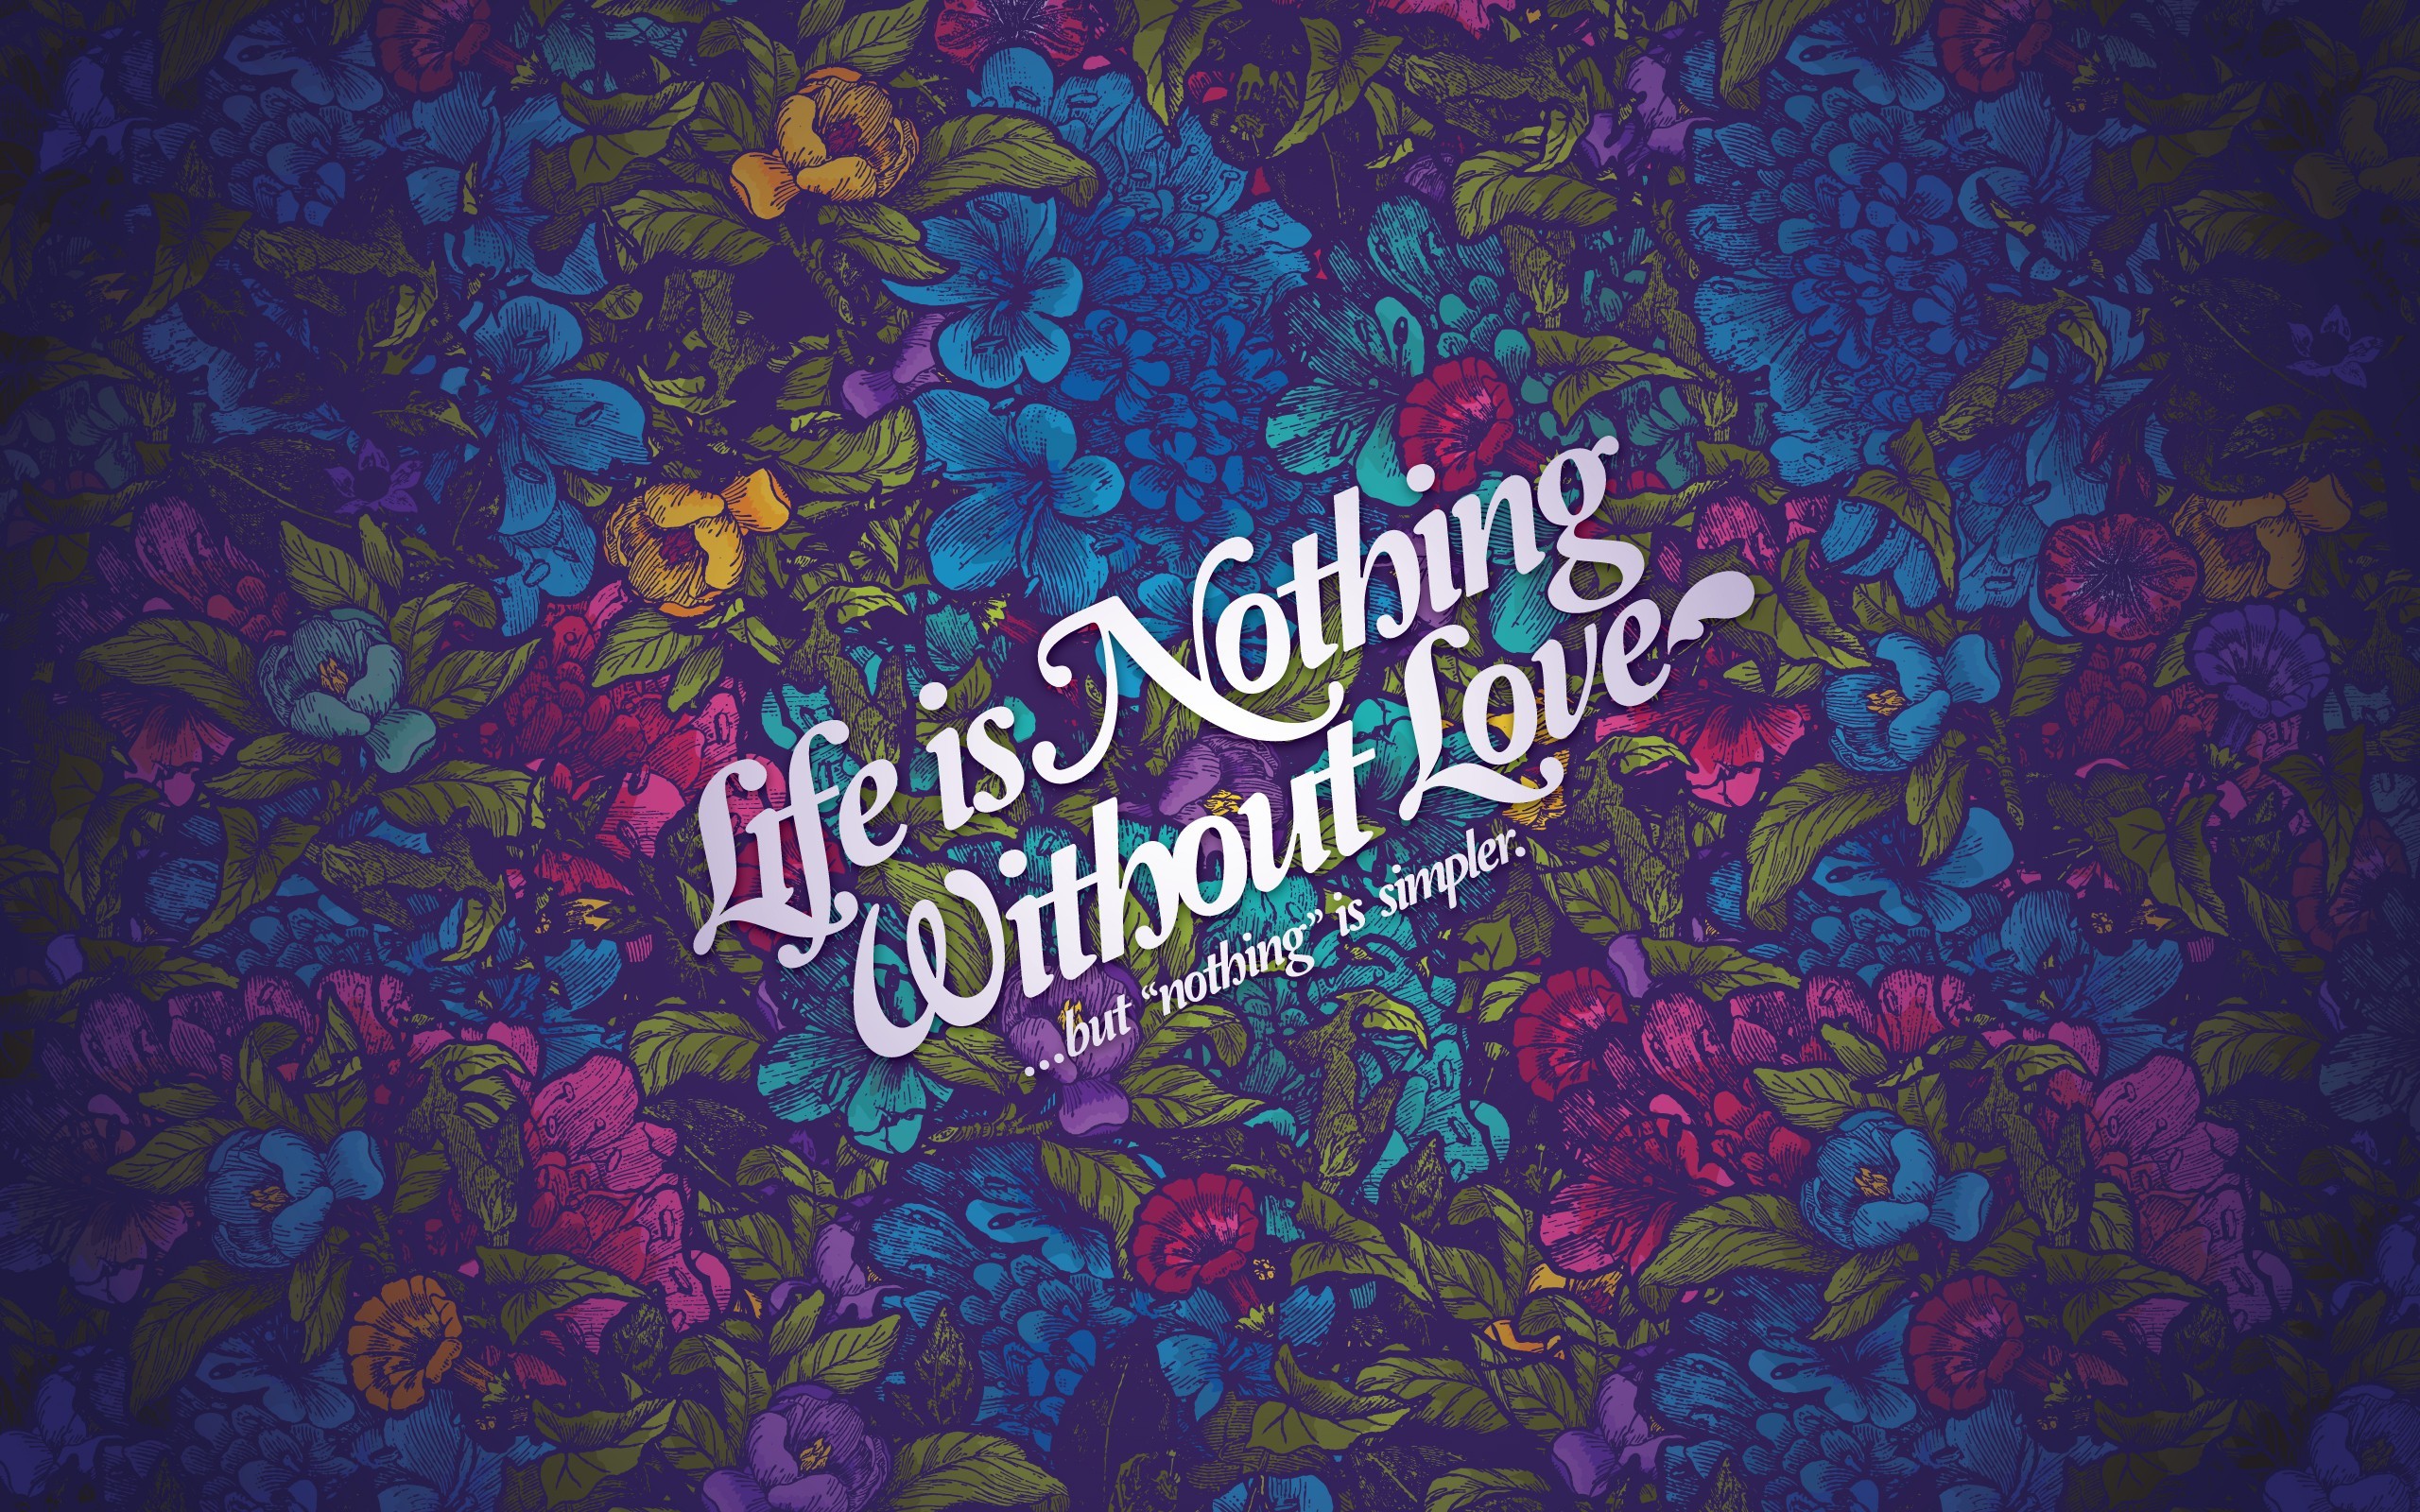 General 2560x1600 Jared Nickerson flowers typography artwork love text quote life digital art